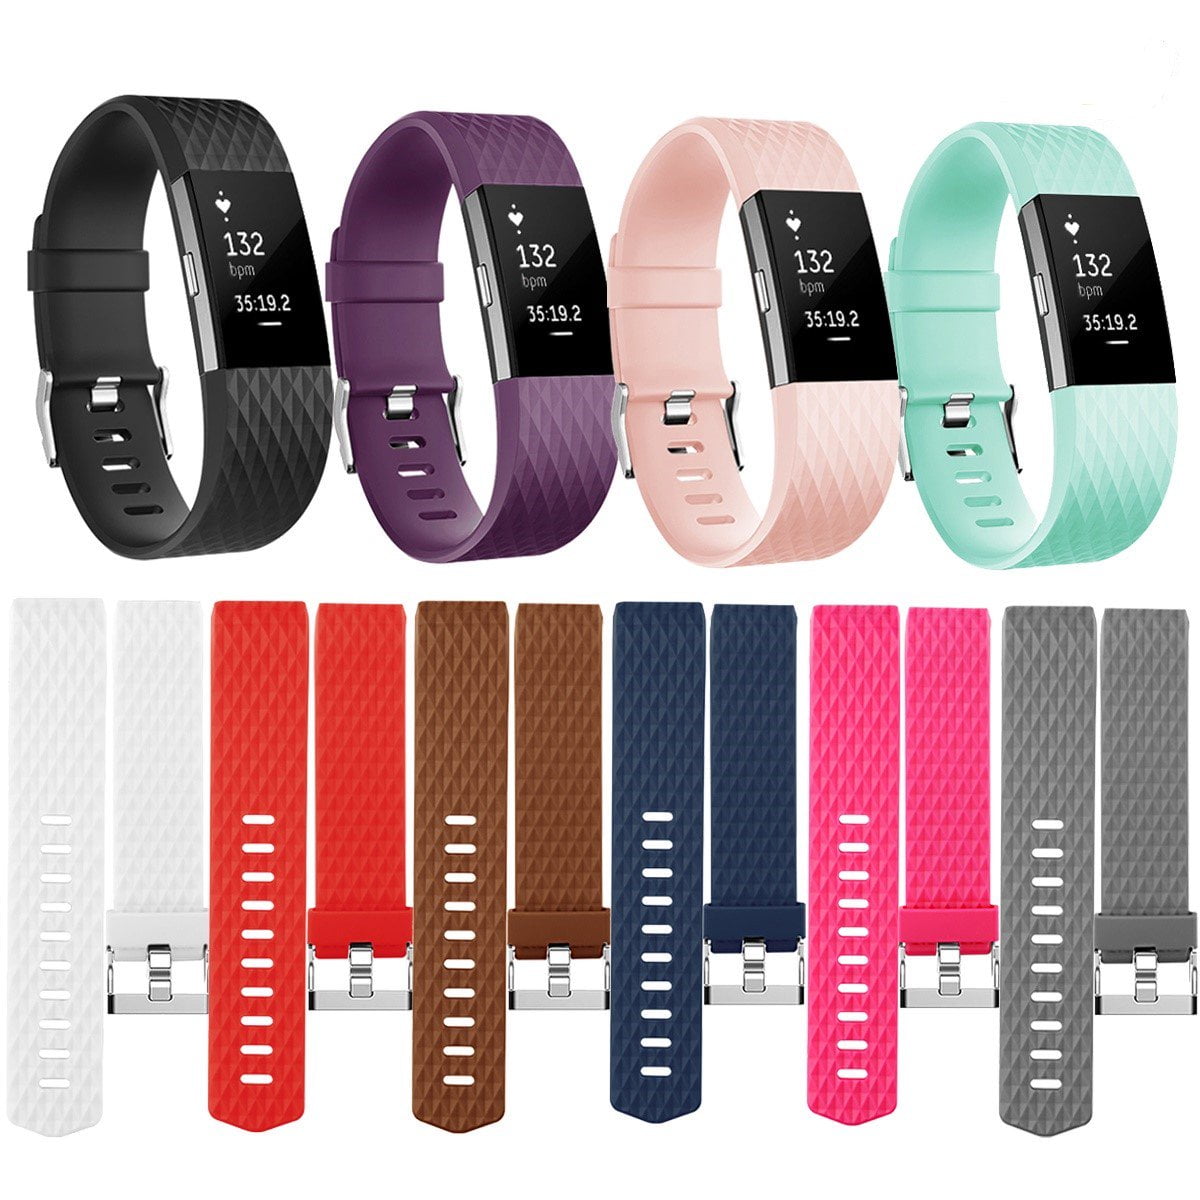 For Fitbit Charge 2 Bands No Tracker New Bracelet Strap Replacement Band Wristband with Secure Silicone Fasteners Metal Clasps for Fitbit Charge 2 